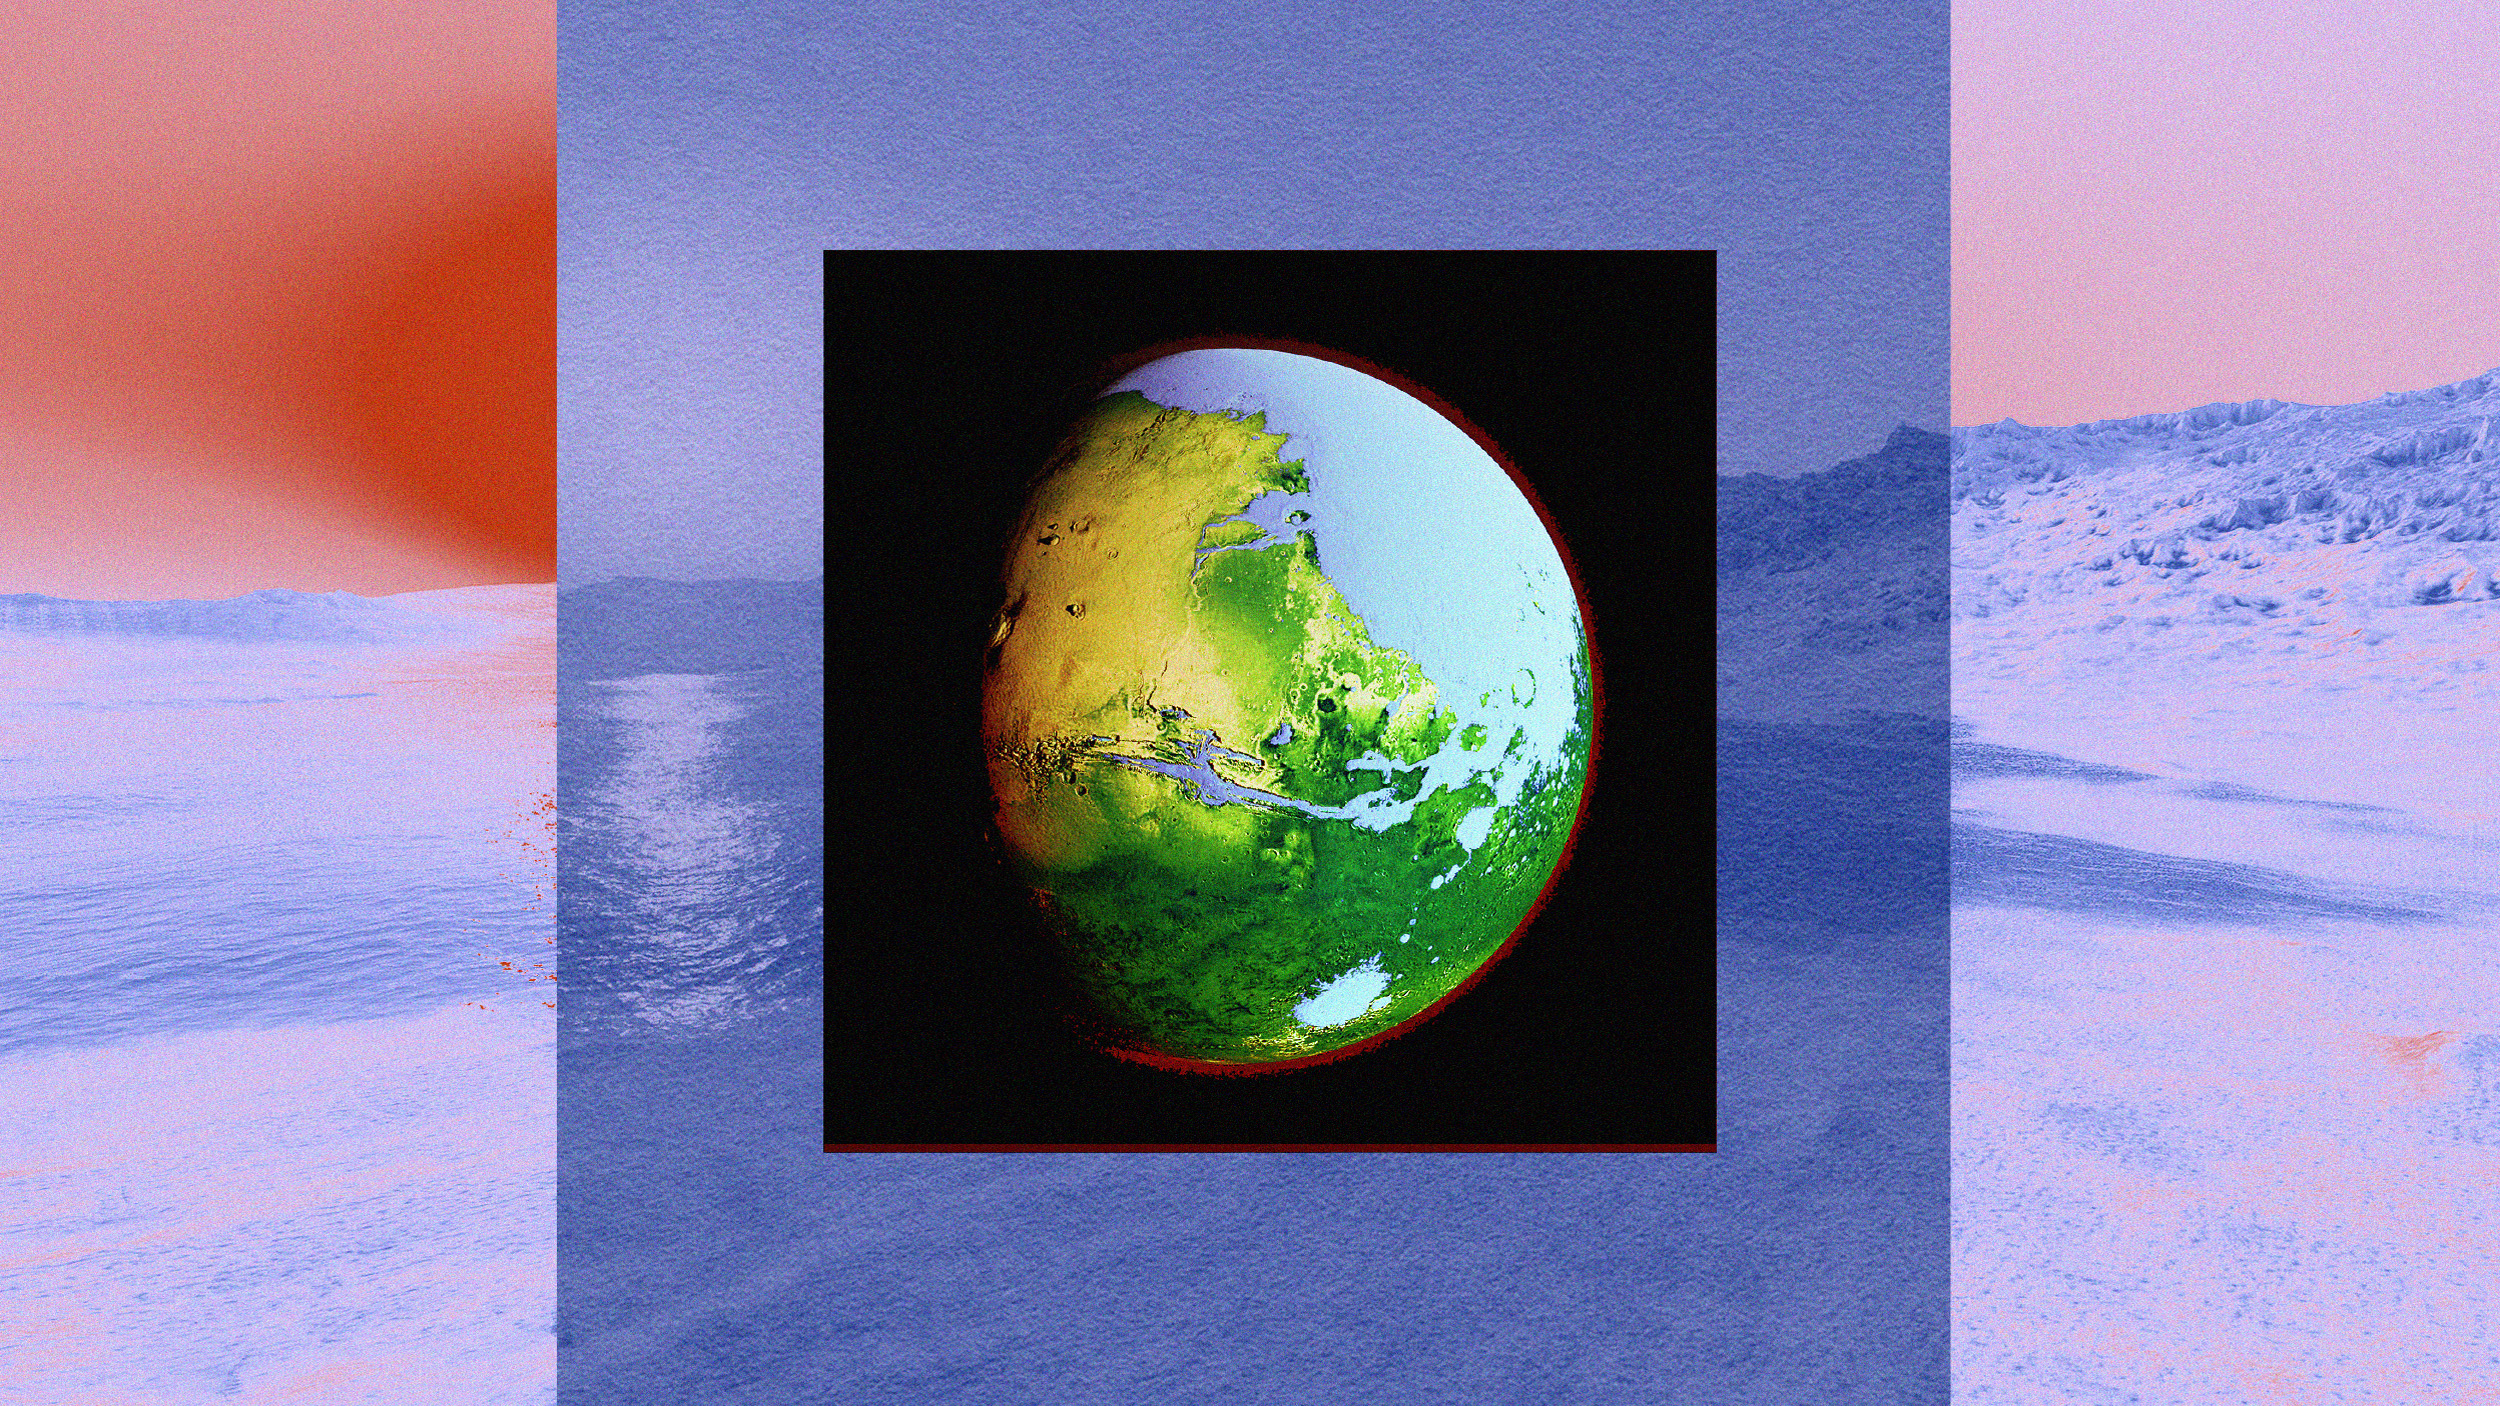 An image of the earth with a mountain in the background, showcasing terraforming potential.